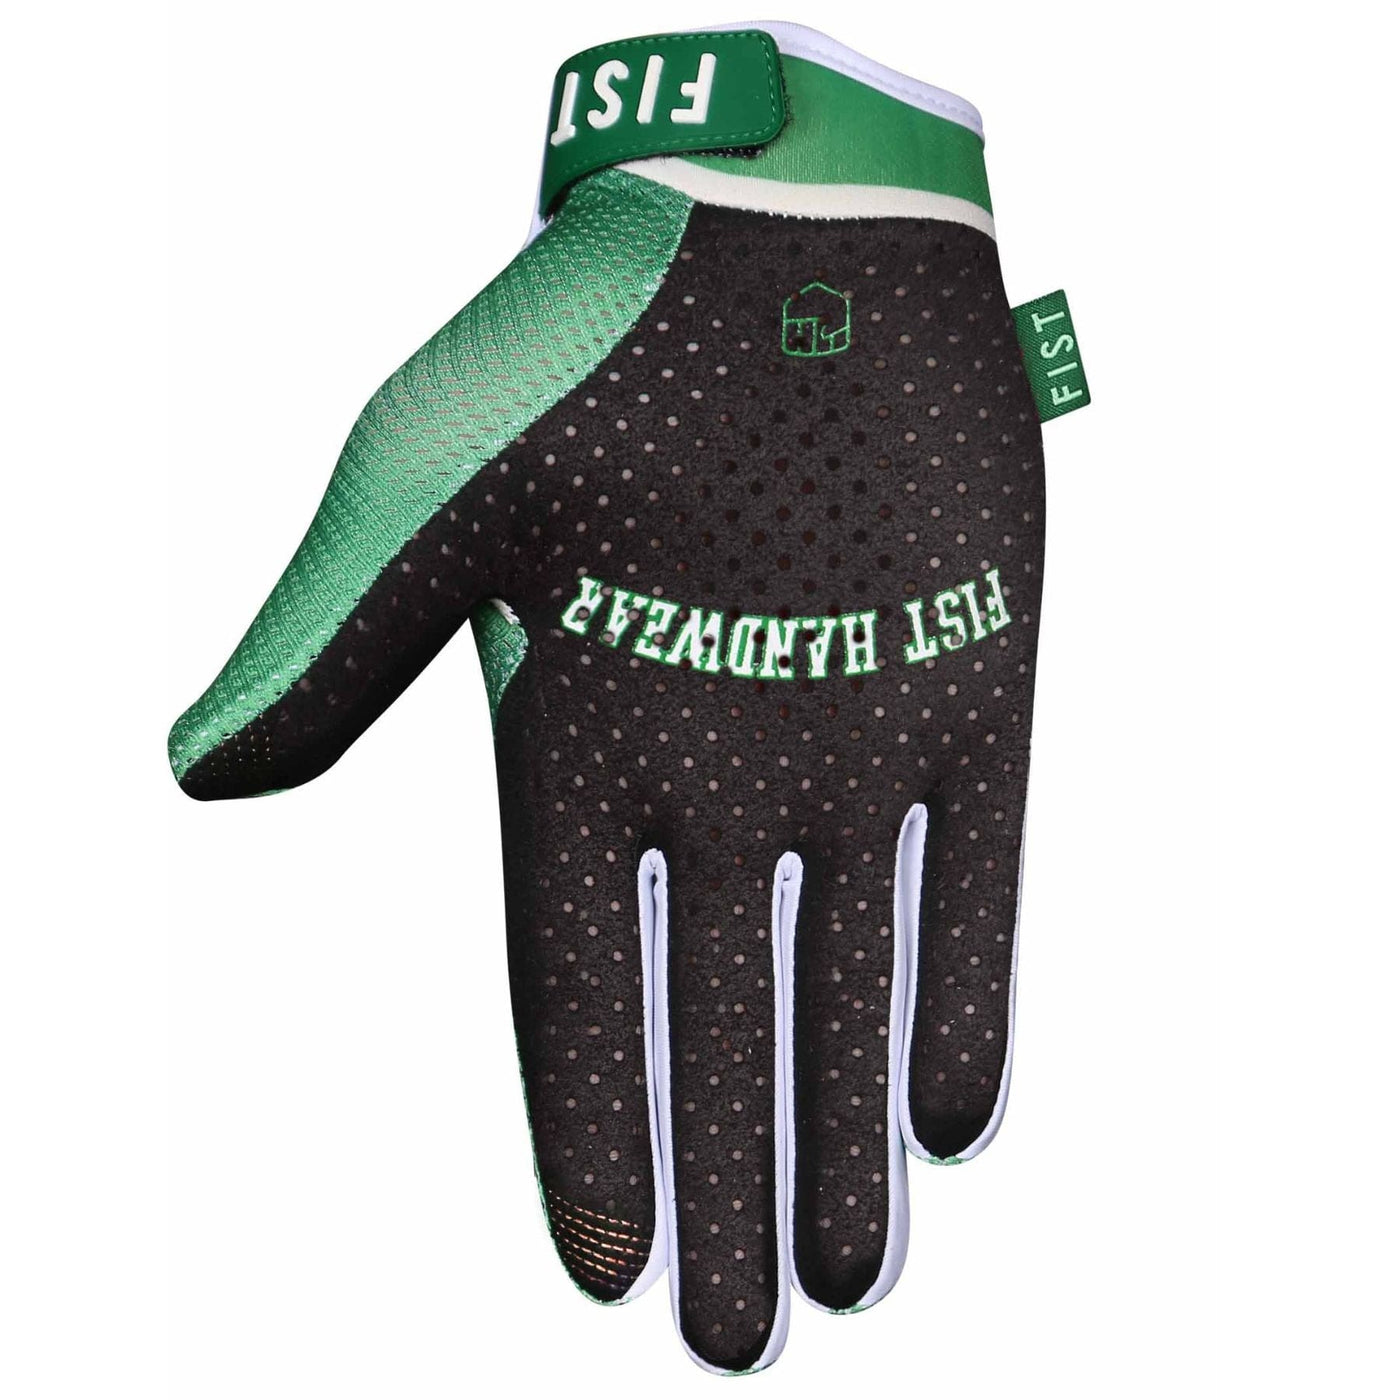 FIST Hot Weather Gloves Breezer - The Garden 8Lines Shop - Fast Shipping